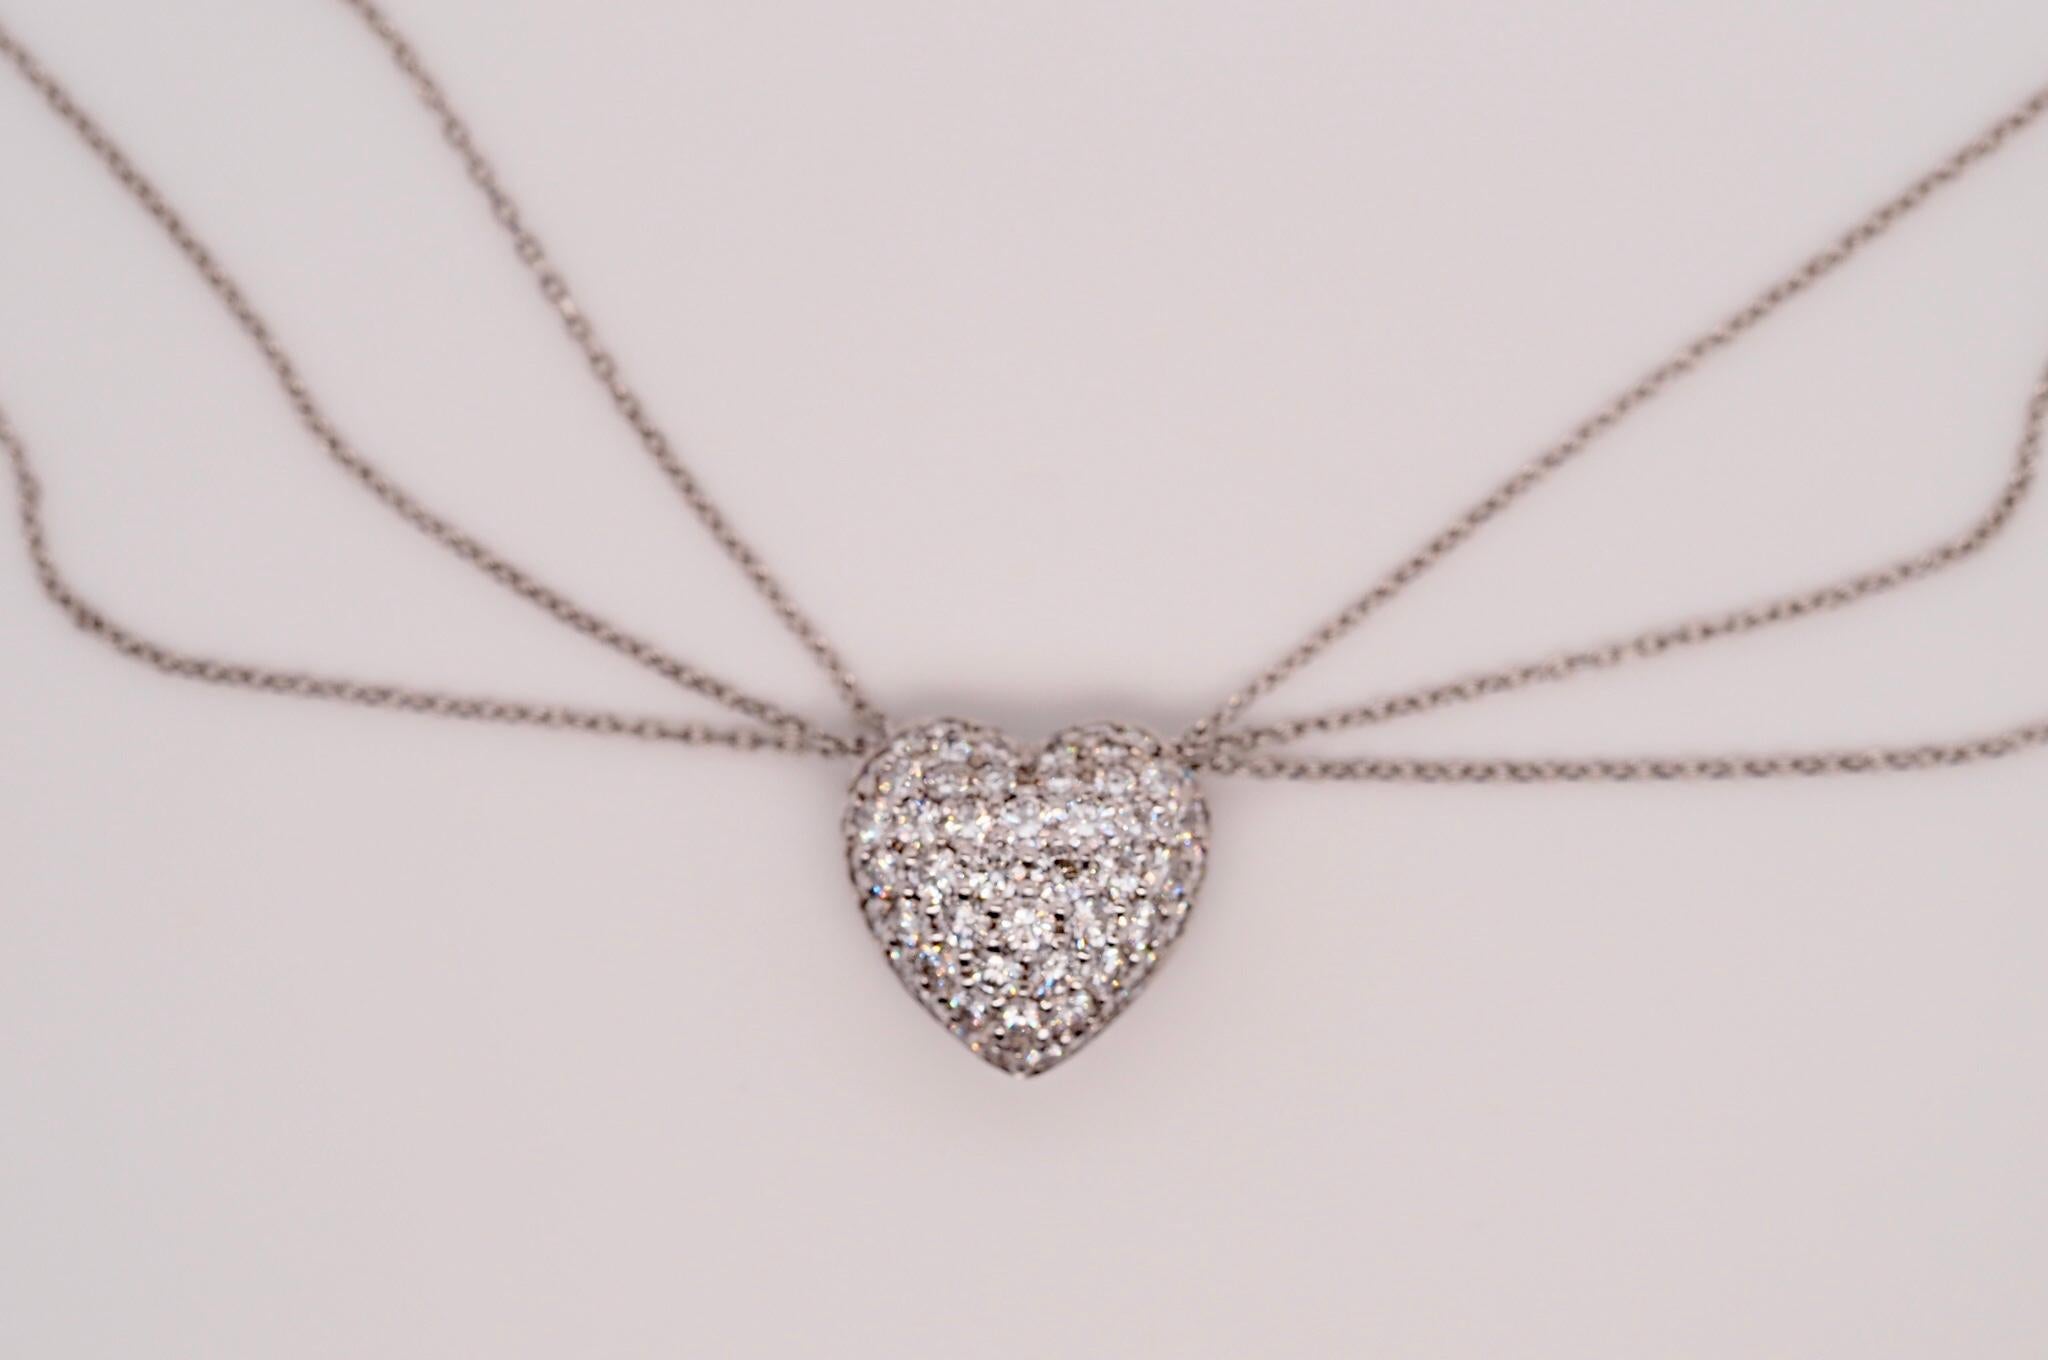 This Platinum Necklace includes 3.00 carats of round brilliant cut diamonds ranging from H-I color and SI1-SI2 Clarity. This piece has amazing brilliance that sparkles at every angle. The heart is set on multi 3-strand platinum necklaces.